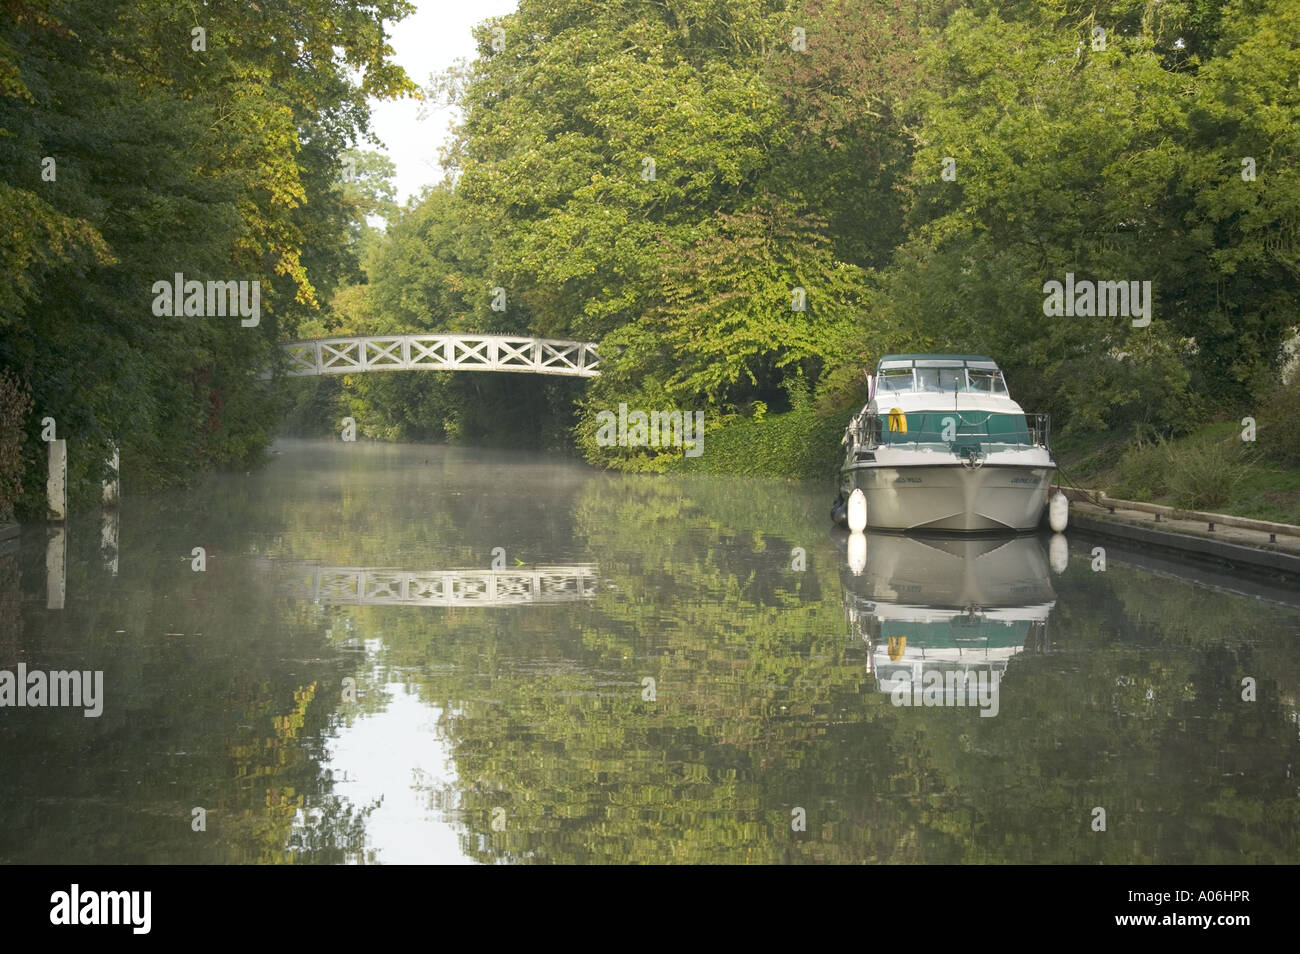 Cookham Lock bridge and a pleasure craft reflecting in the still River Thames water Stock Photo